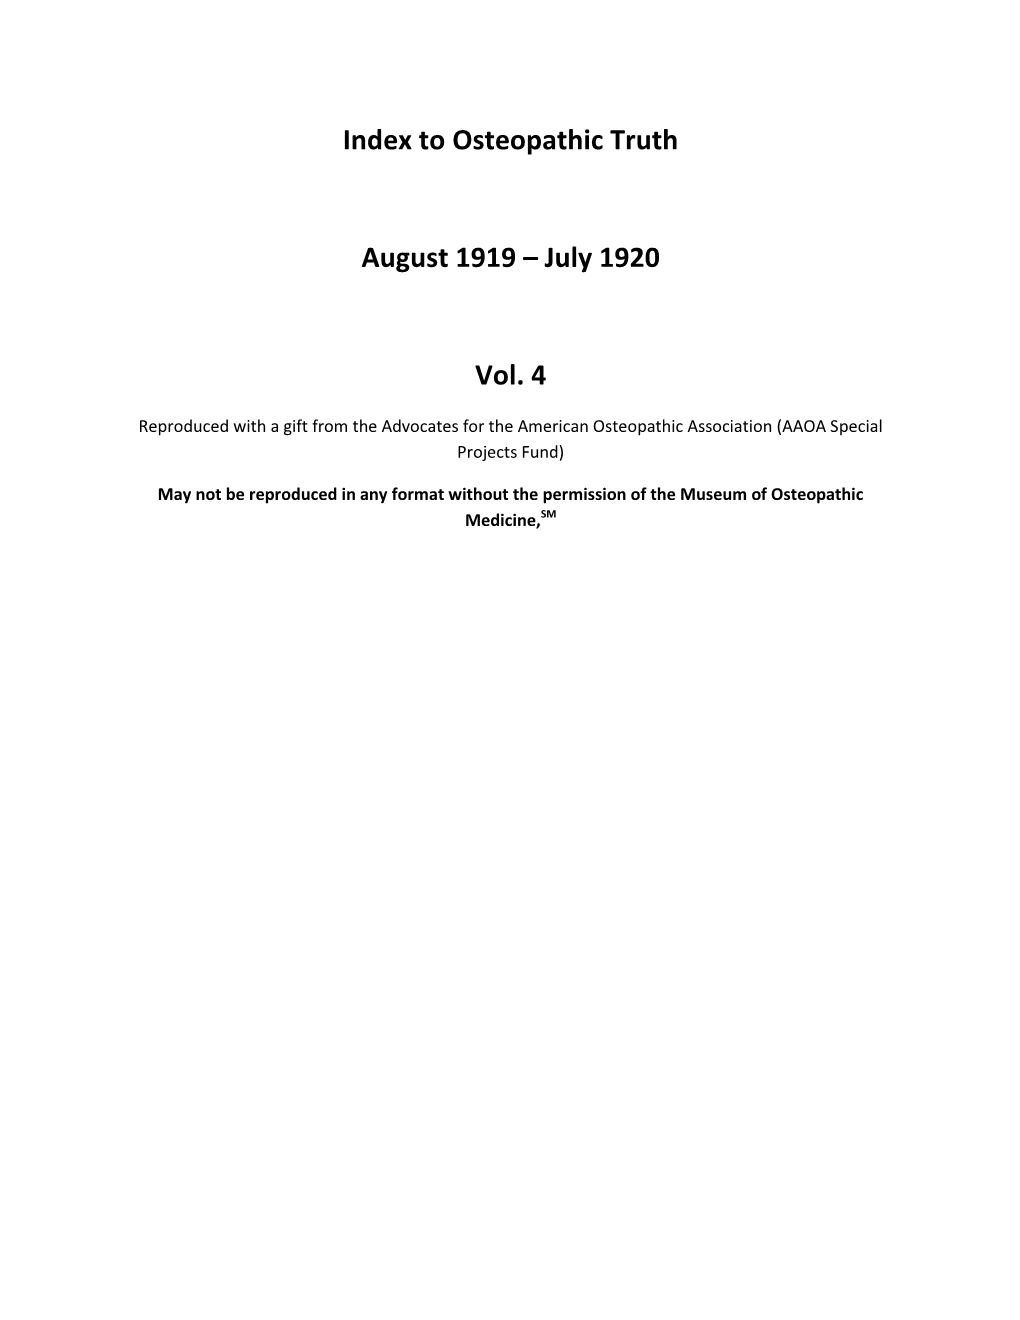 To Osteopathic Truth August 1919 – July 1920 Vol. 4